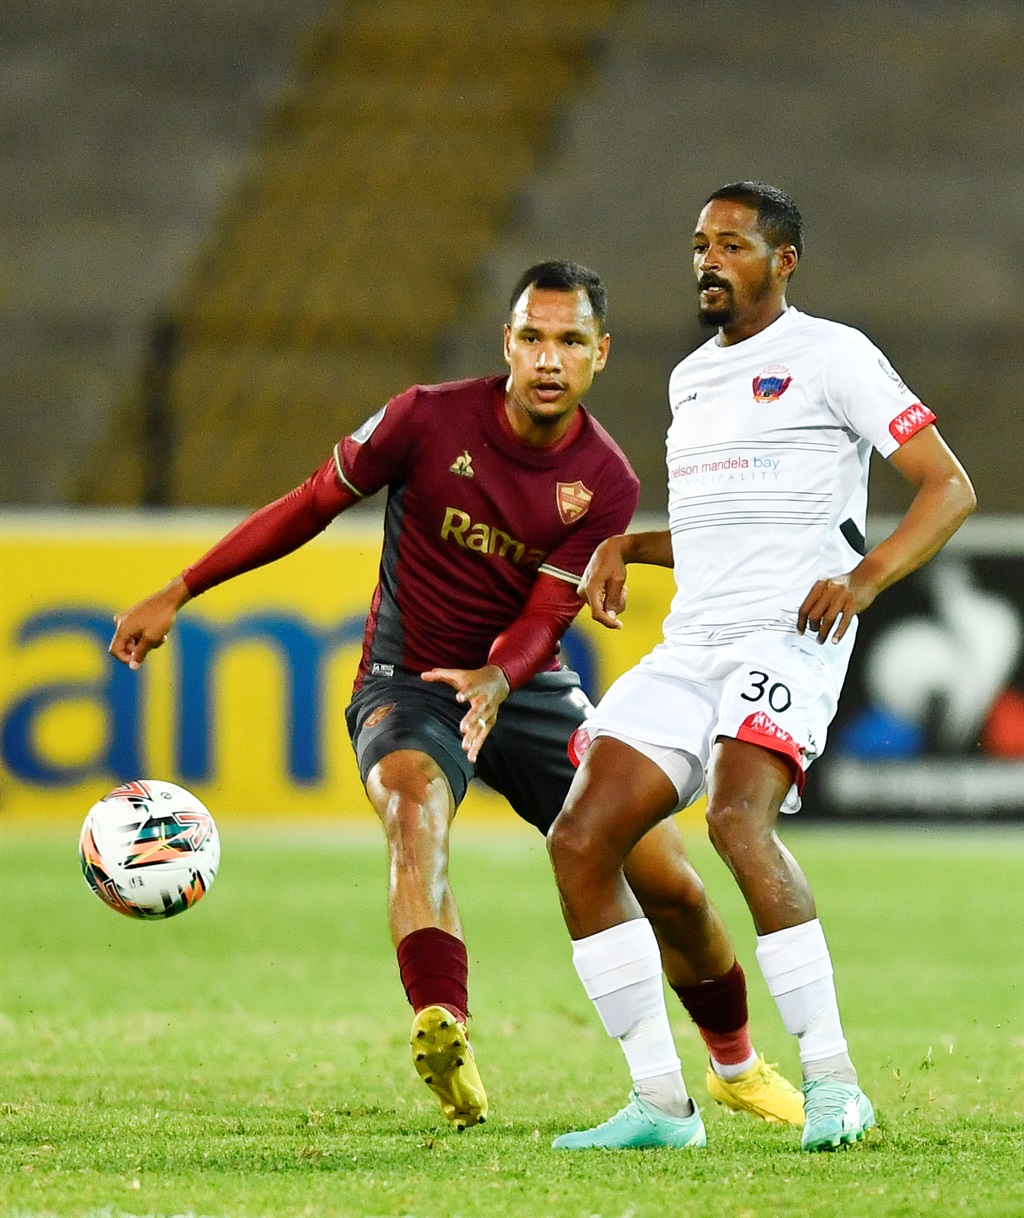 STELLENBOSCH, SOUTH AFRICA - MARCH 01: Craig Martin of Chippa United during the DStv Premiership match between Stellenbosch FC and Chippa United at Danie Craven Stadium on March 01, 2024 in Stellenbosch, South Africa. (Photo by Ashley Vlotman/Gallo Images)